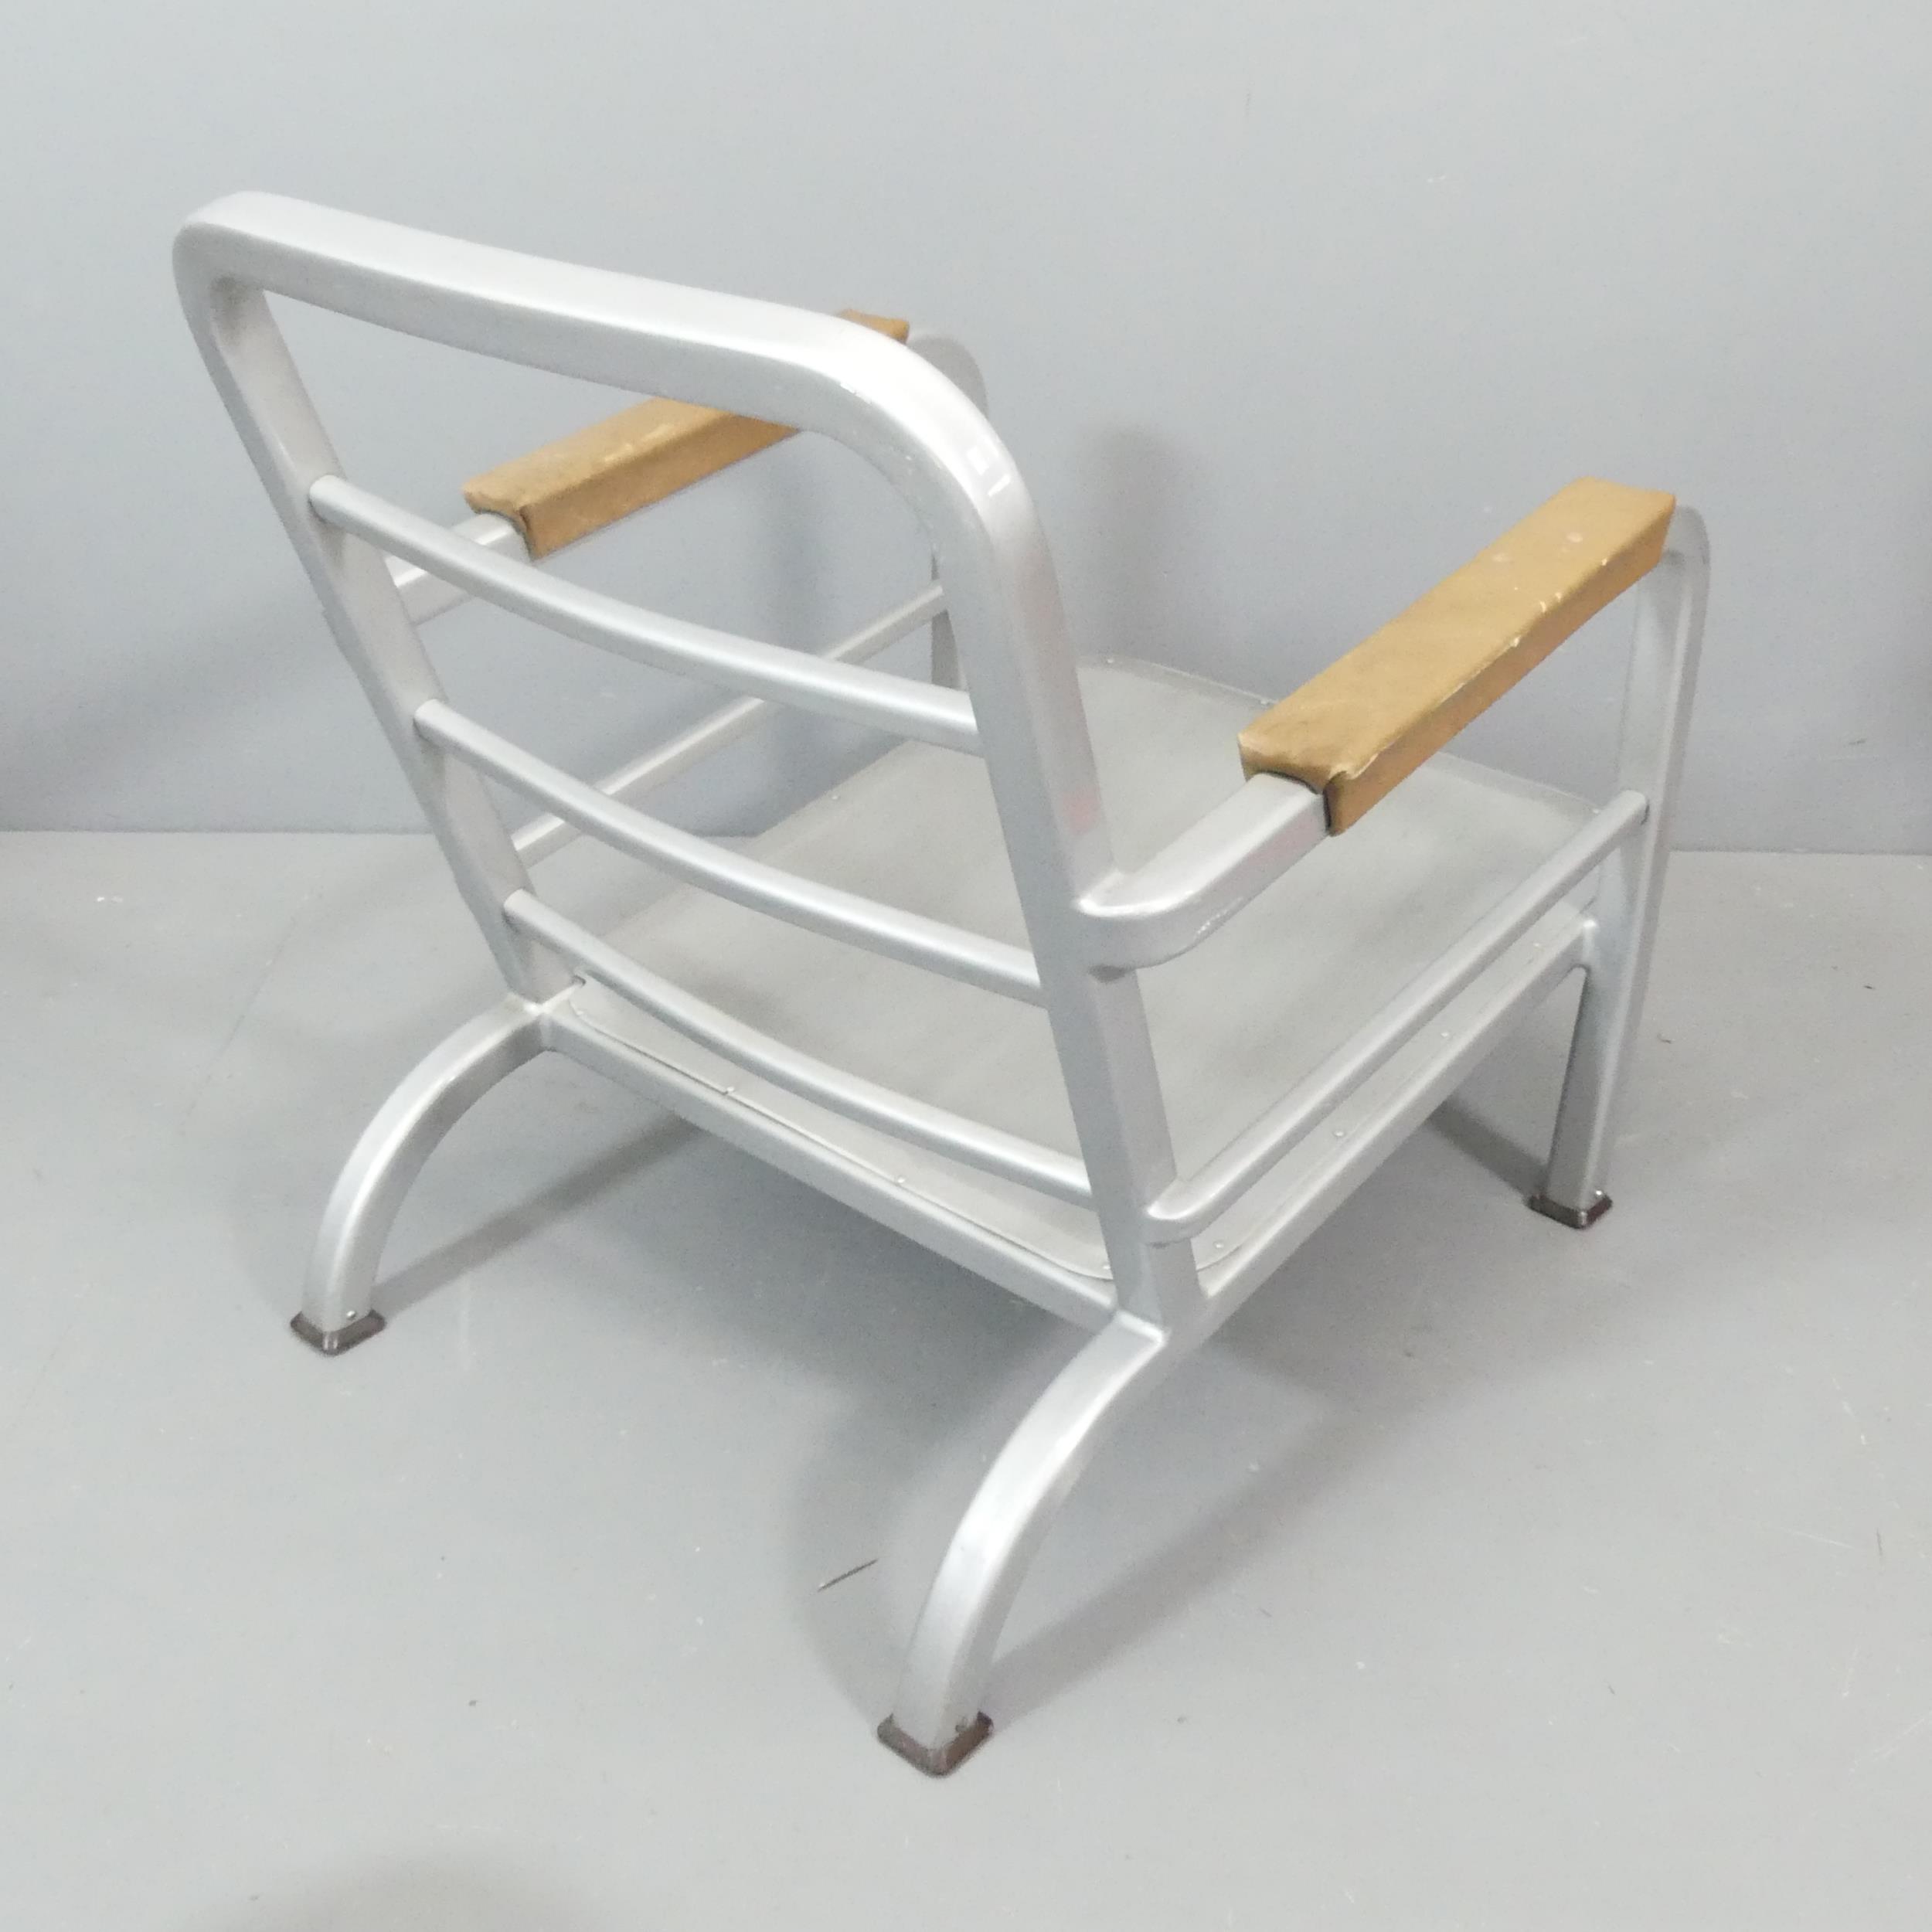 U.S CHAIRCRAFT - A 1953 US Army Medical Corps lounge chair, with aluminium frame and leather - Image 3 of 5